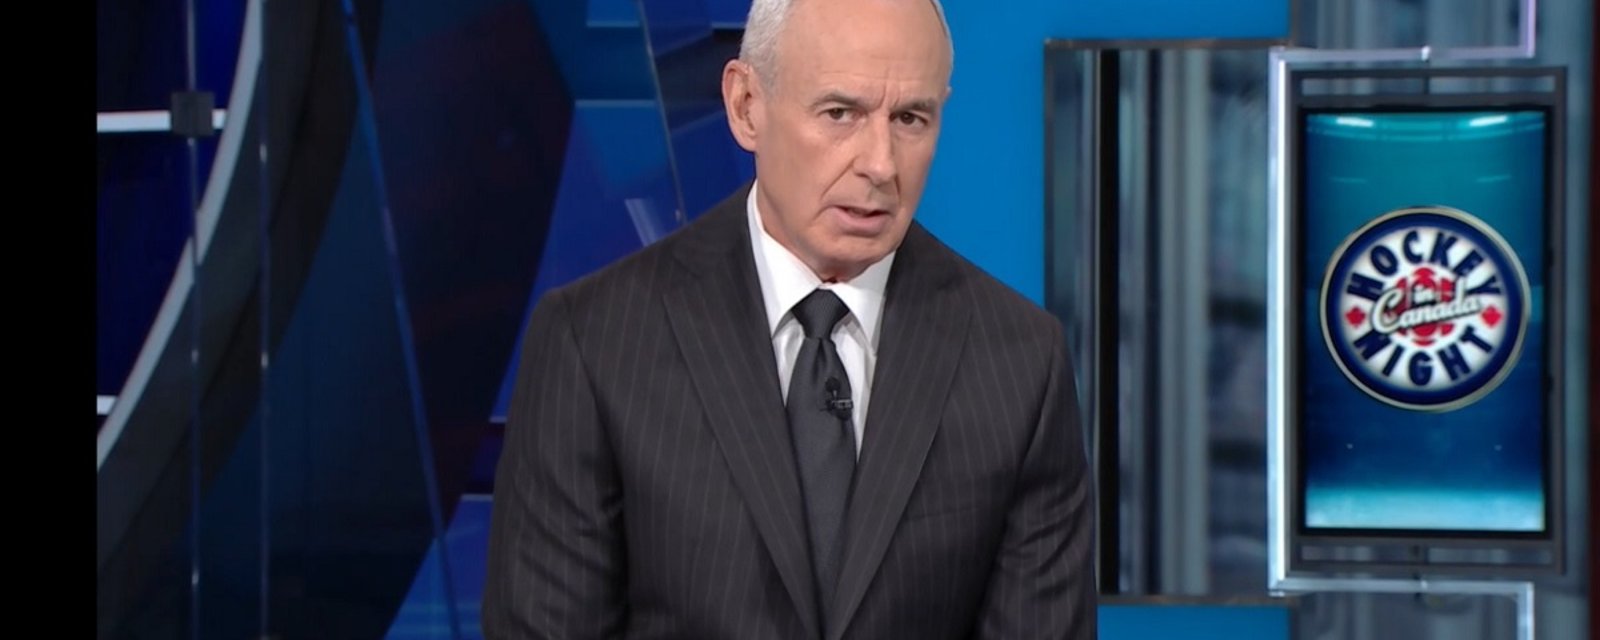 Ron MacLean attempts to apologize to fans on Hockey Night in Canada.